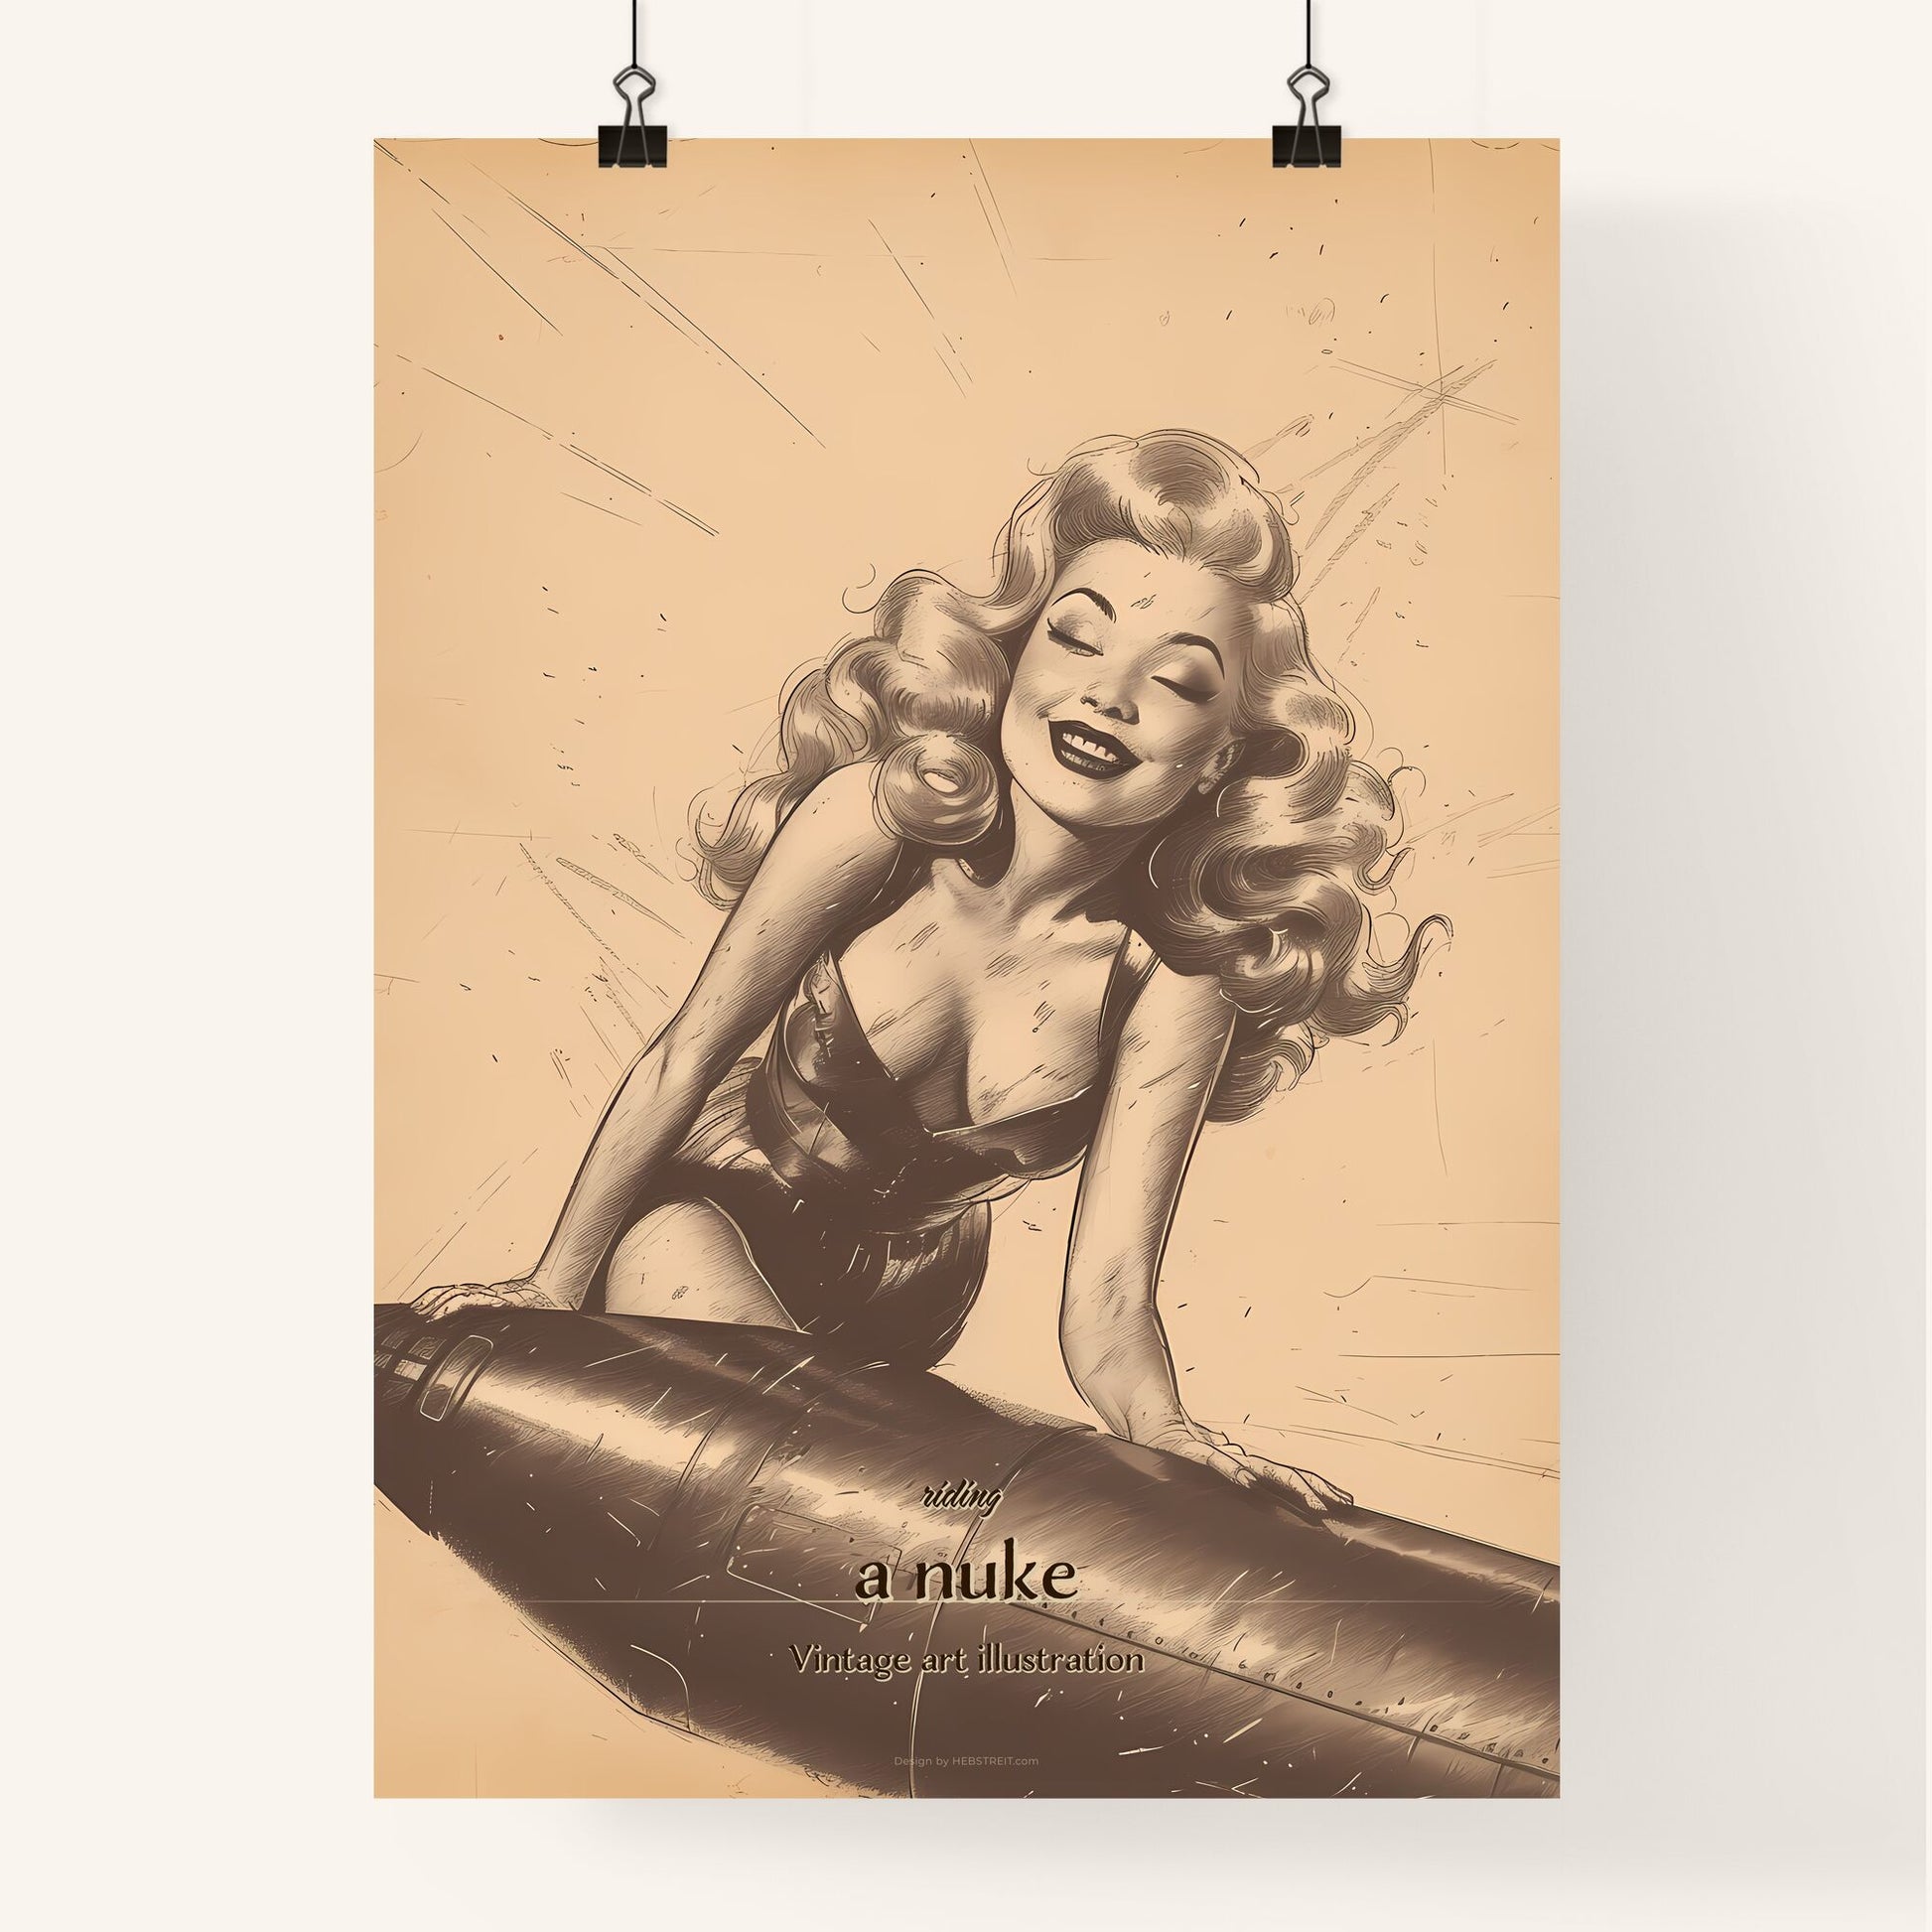 riding, a nuke, Vintage art illustration, A Poster of a woman leaning on a missile Default Title